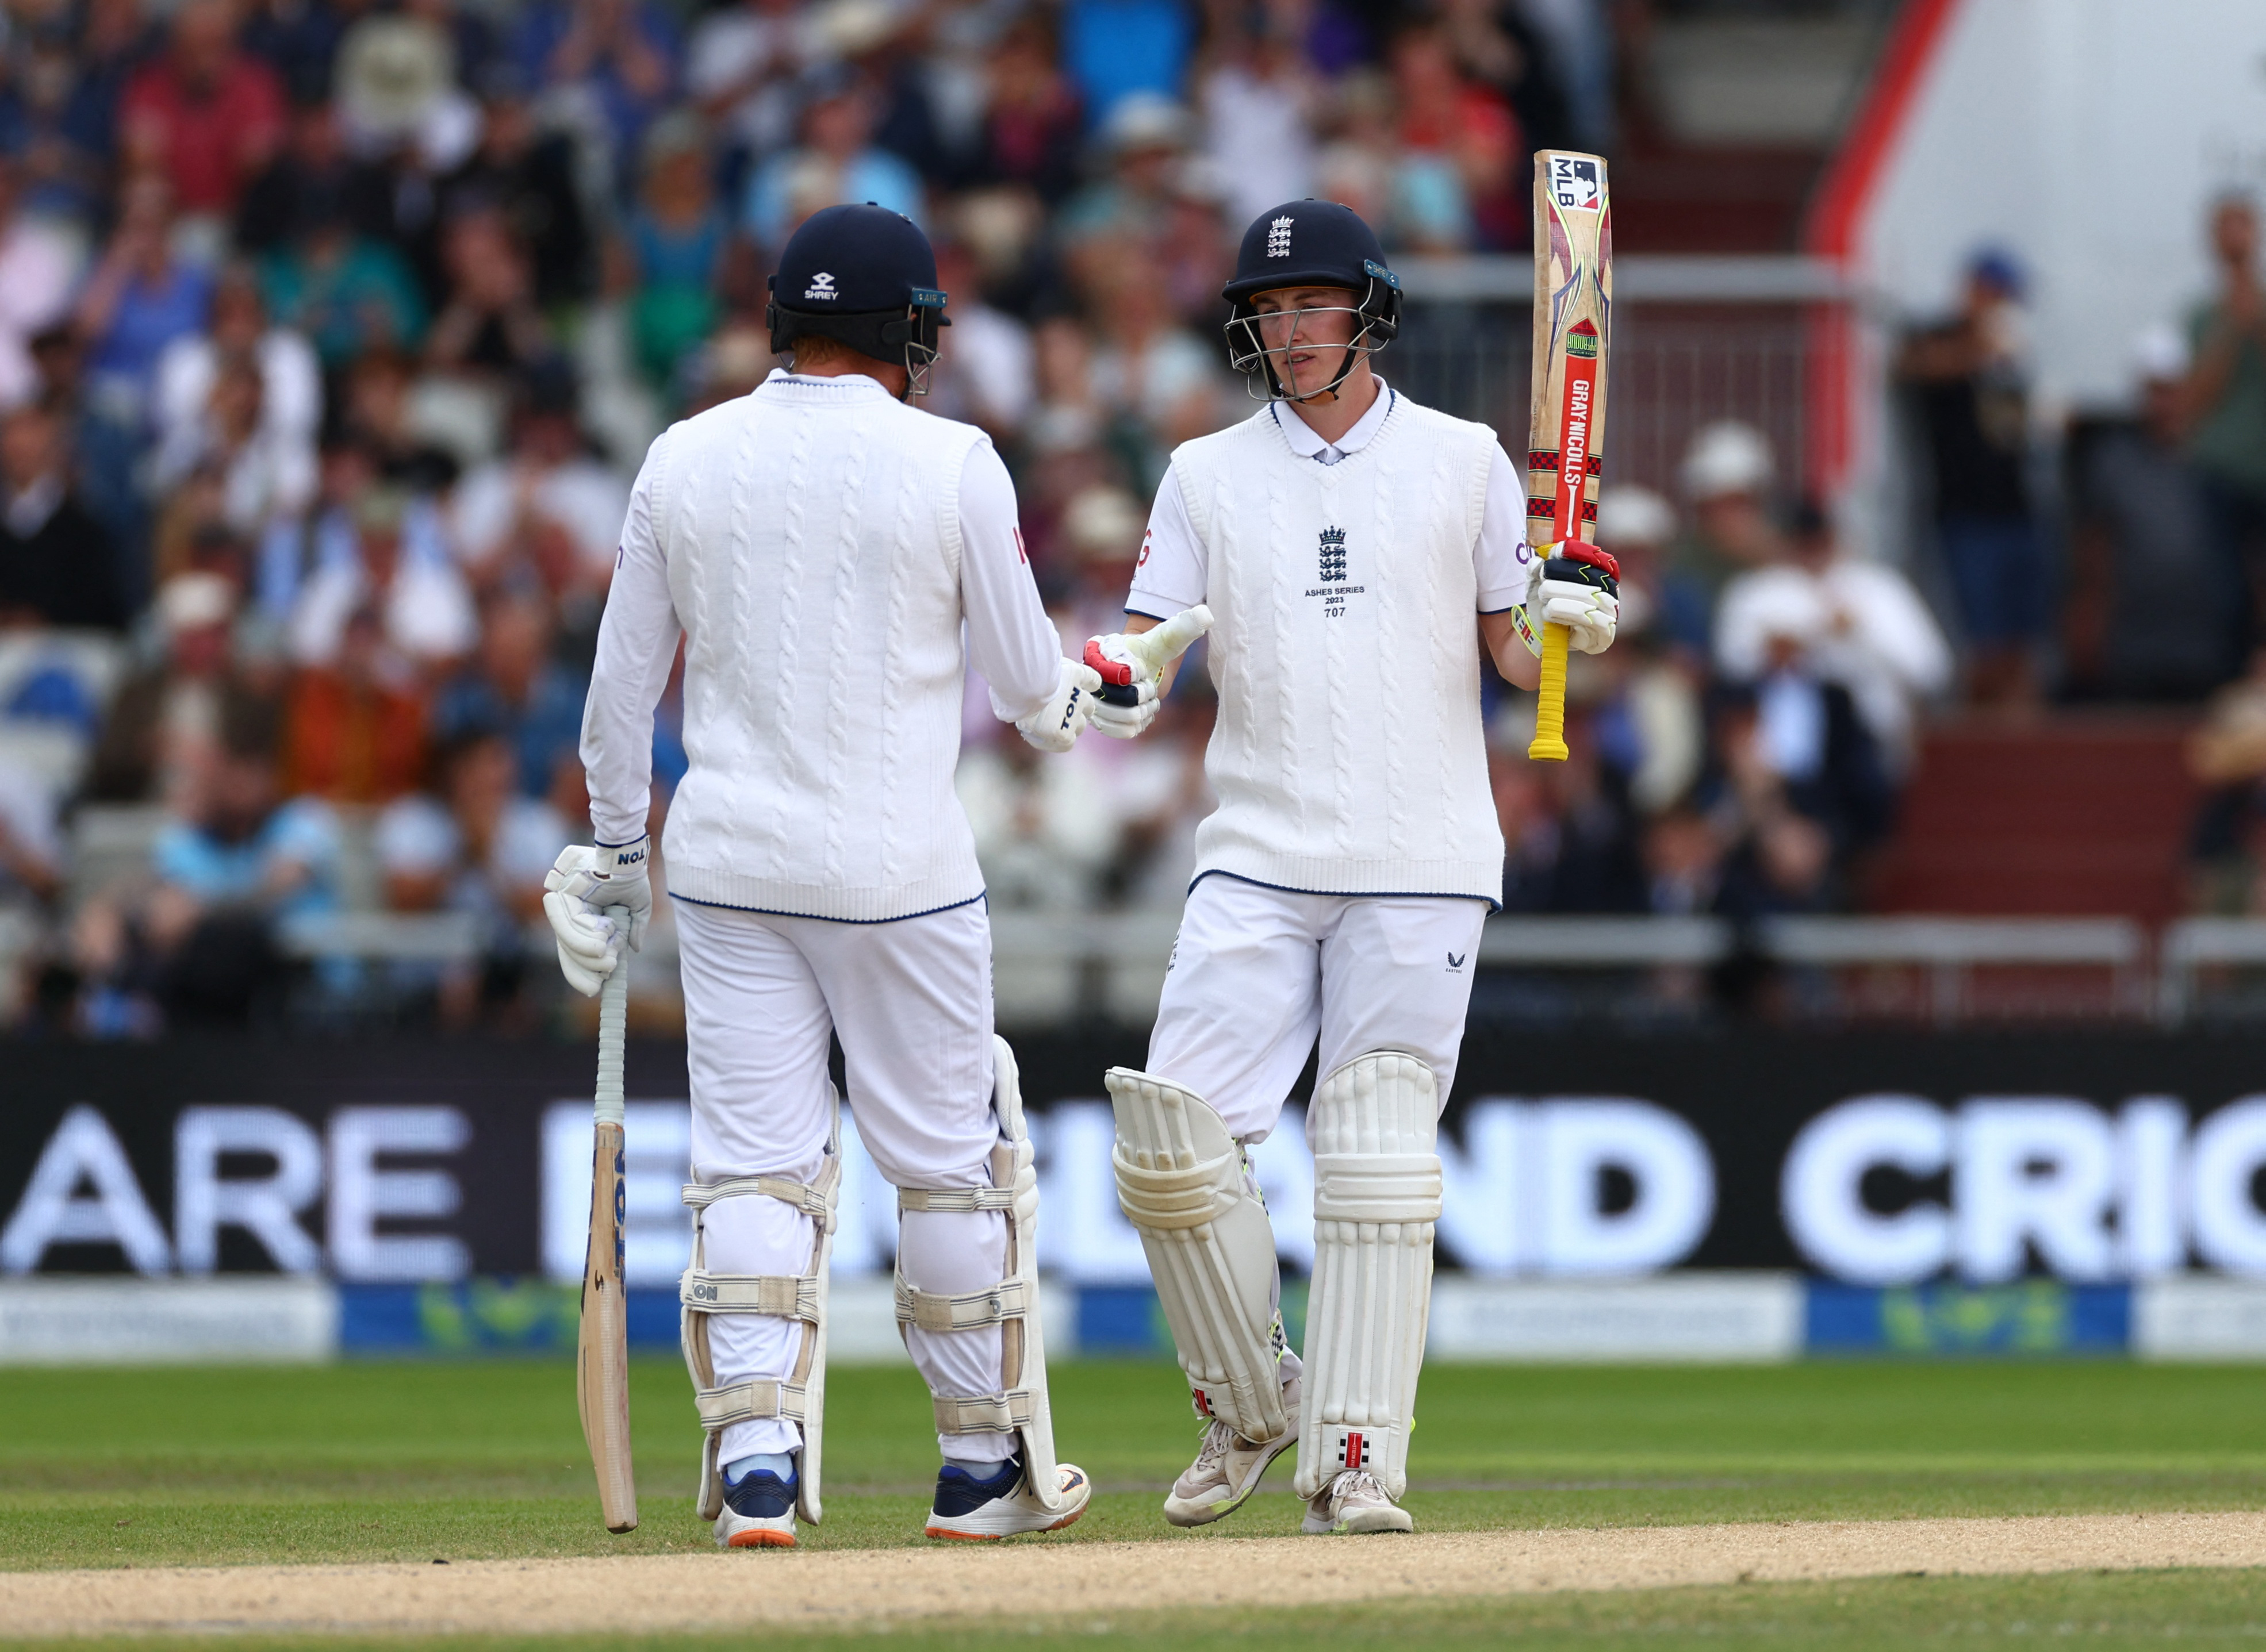 Big-hitting Bairstow gives England commanding Ashes test lead Reuters